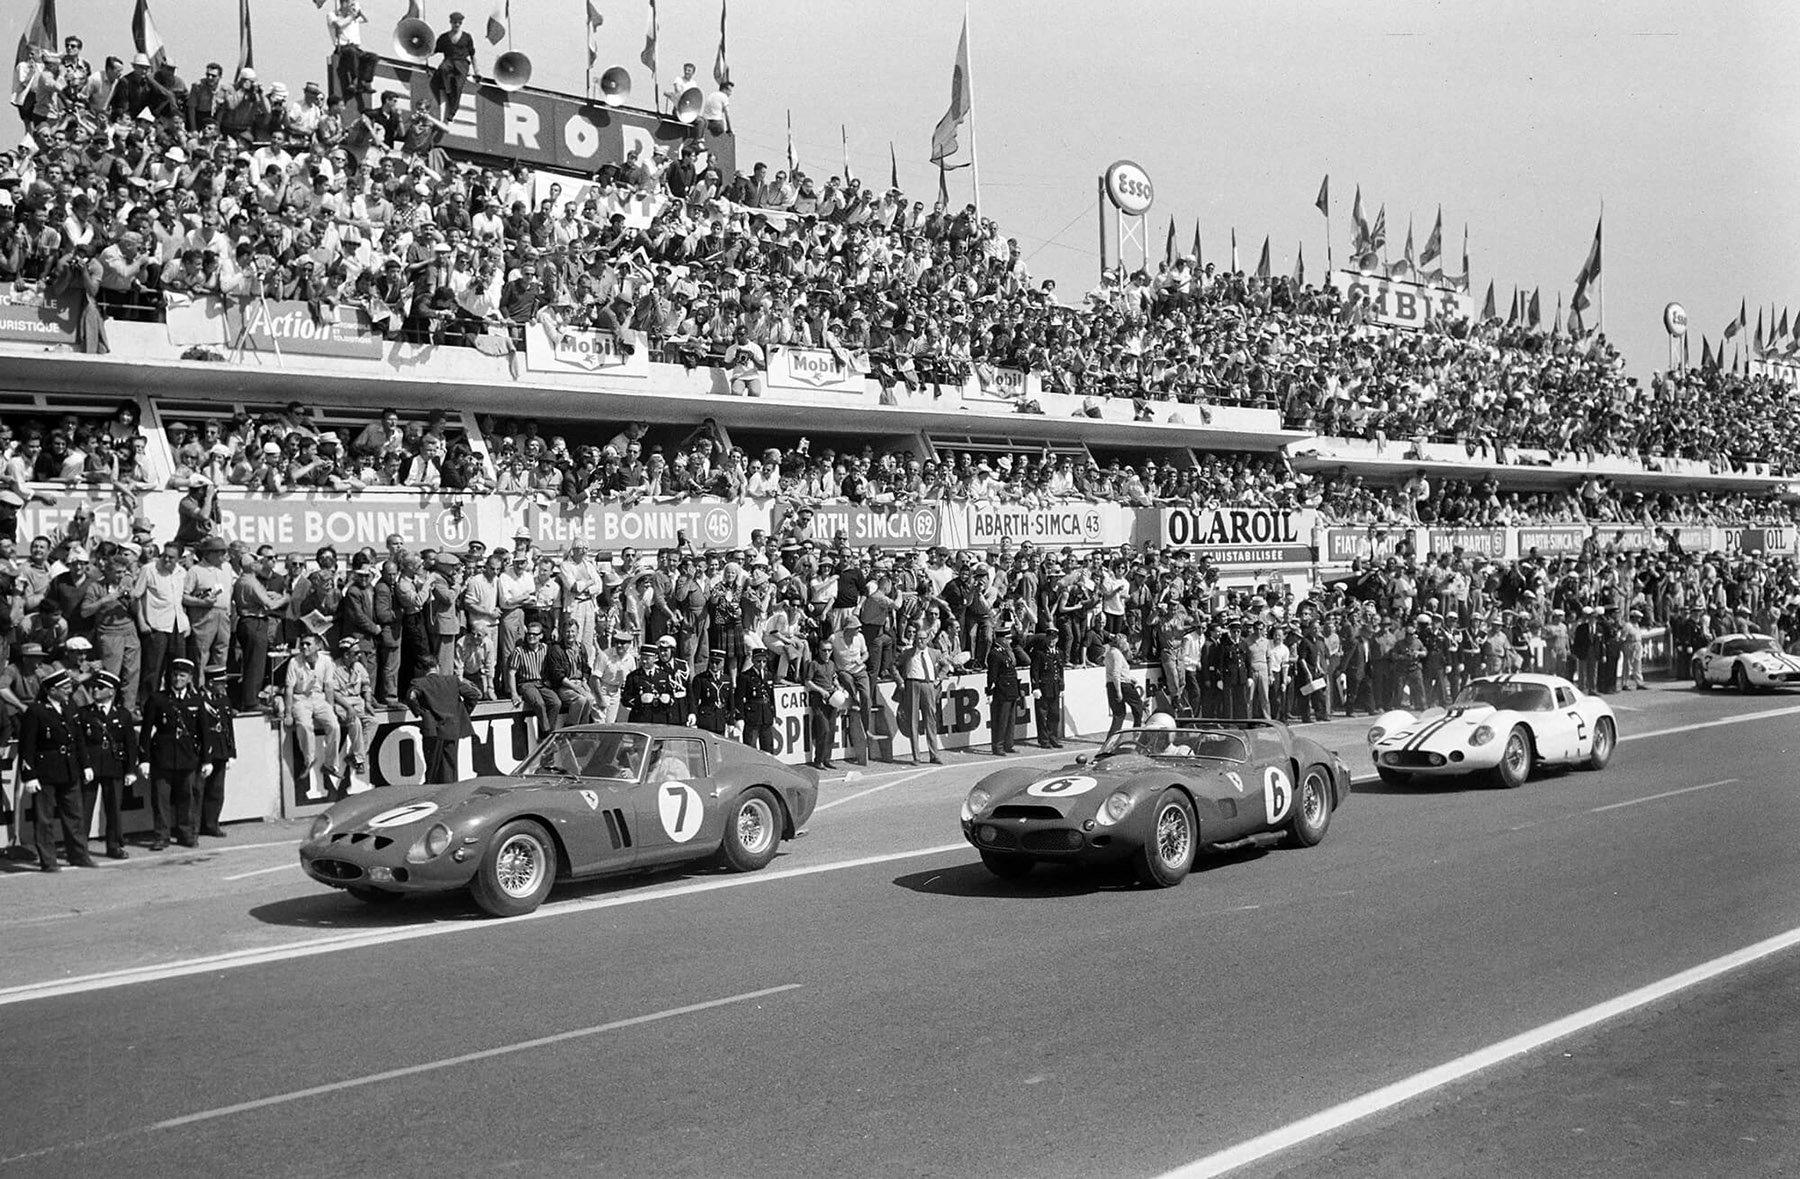 Mike Parkes and Lorenzo Bandini’s Ferrari (#7) leads Olivier Gendebien and Phil Hill’s Ferrari (#6) followed by Bruce McLaren and Walt Hansgen’s Maserati (#2) at the start during the 24 Hours of Le Mans at Circuit de la Sarthe on 24 June 1962.